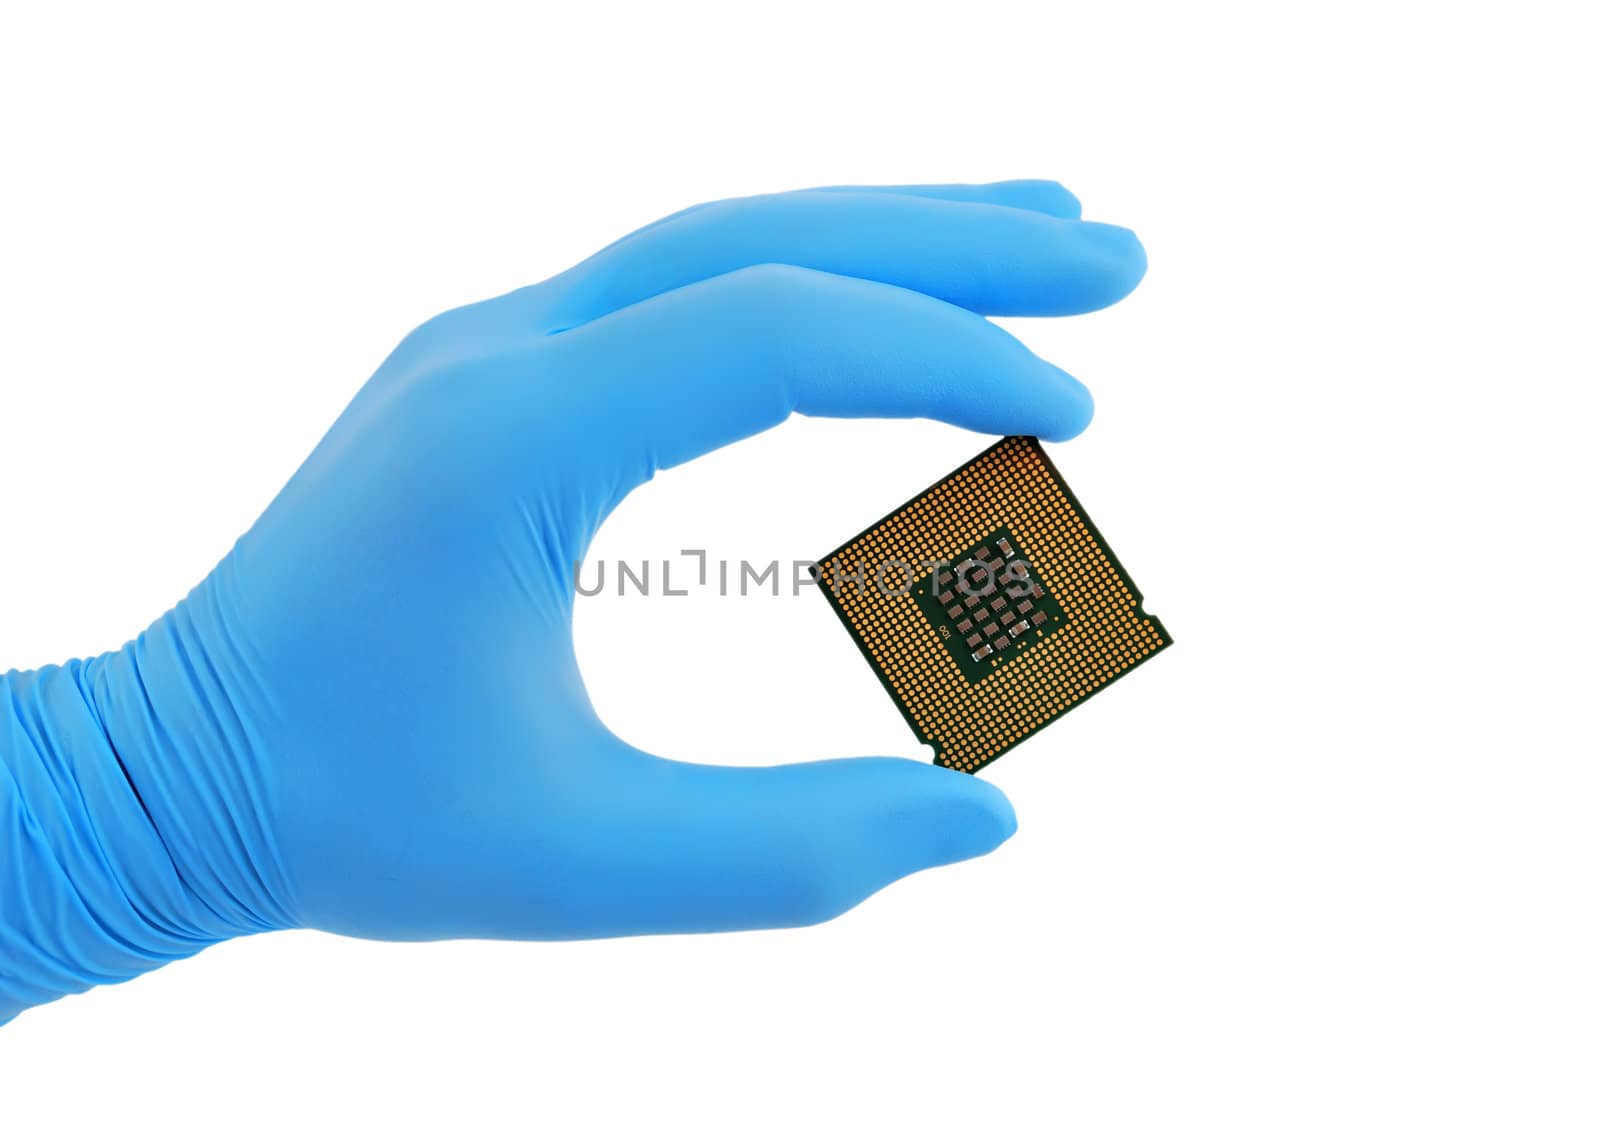 cpu in hand on white background